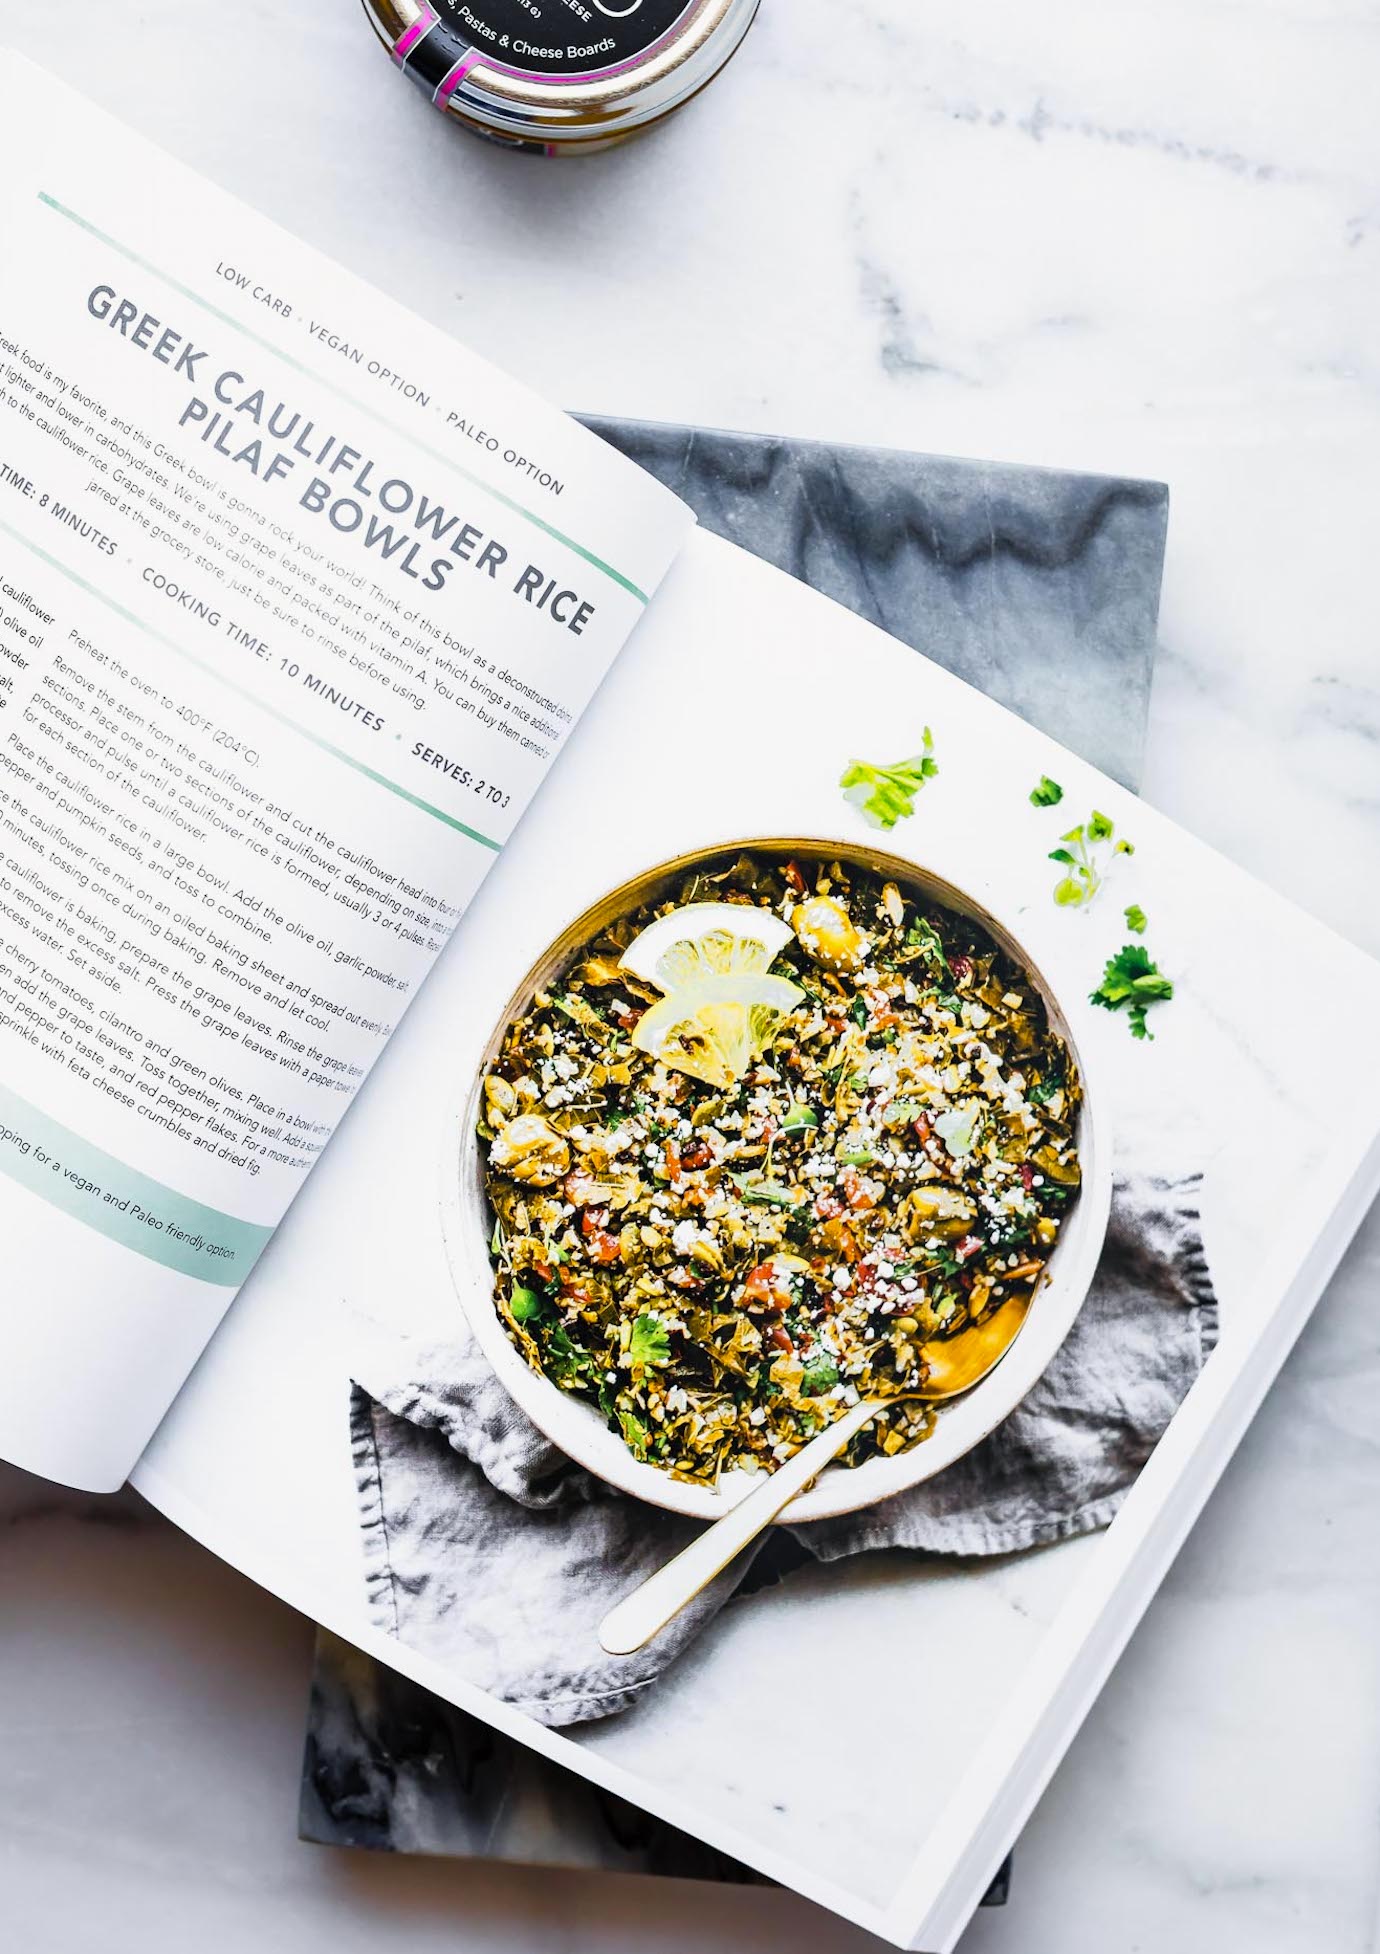 nourishing bowls cookbook open to the page with image of Greek Cauliflower Rice Pilaf Bowls.